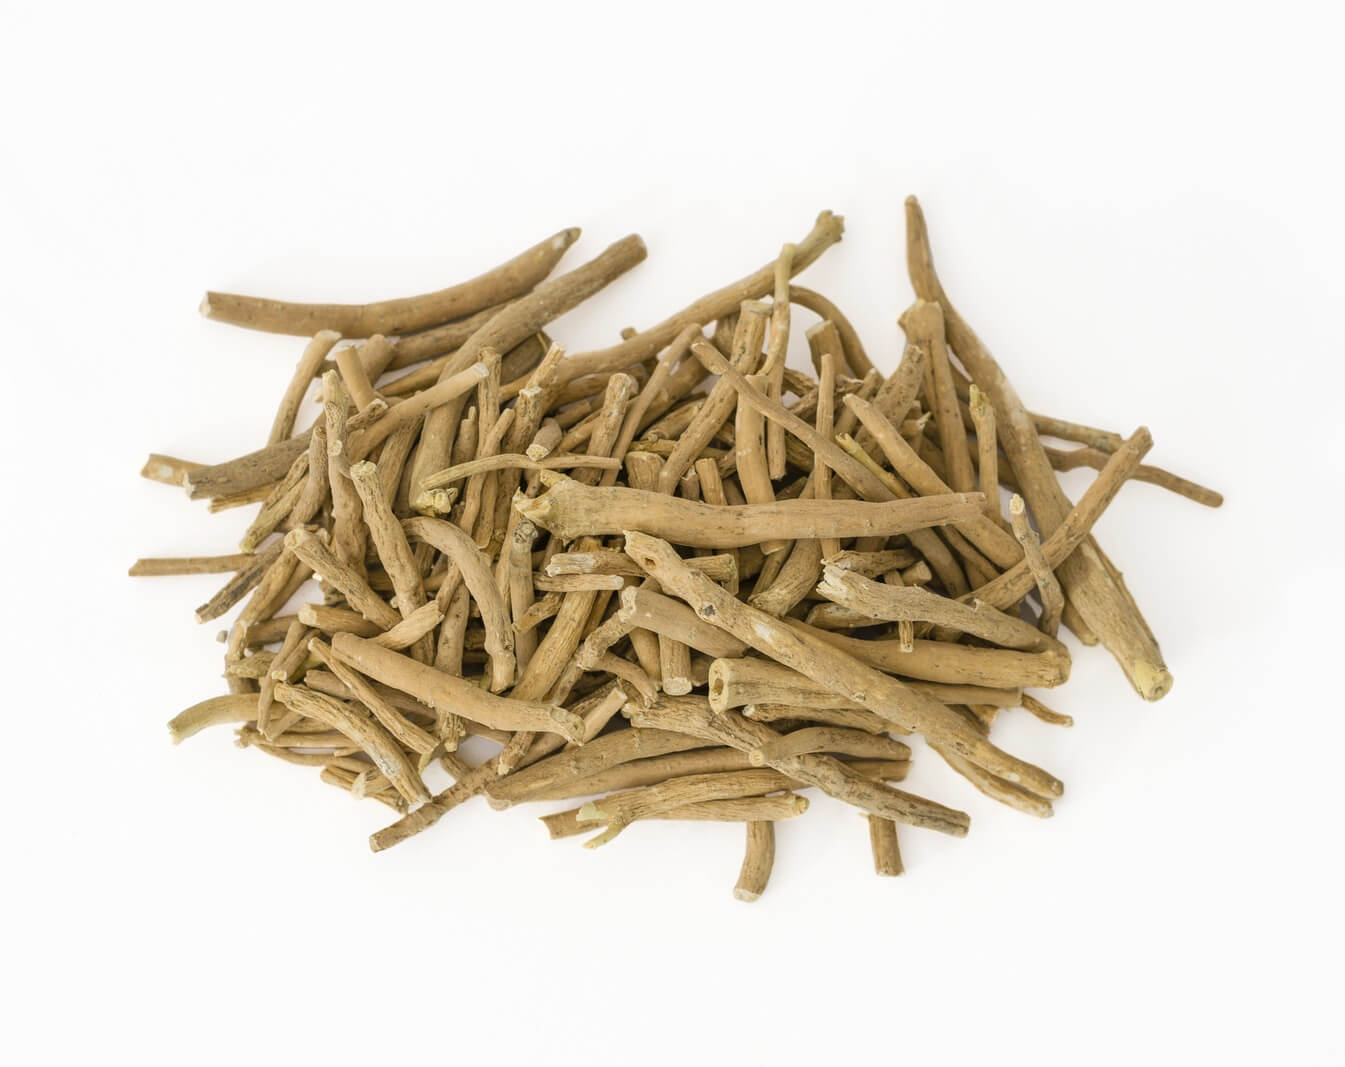 Ashwagandha (Withania somnifera) or winter cherry roots on a white background